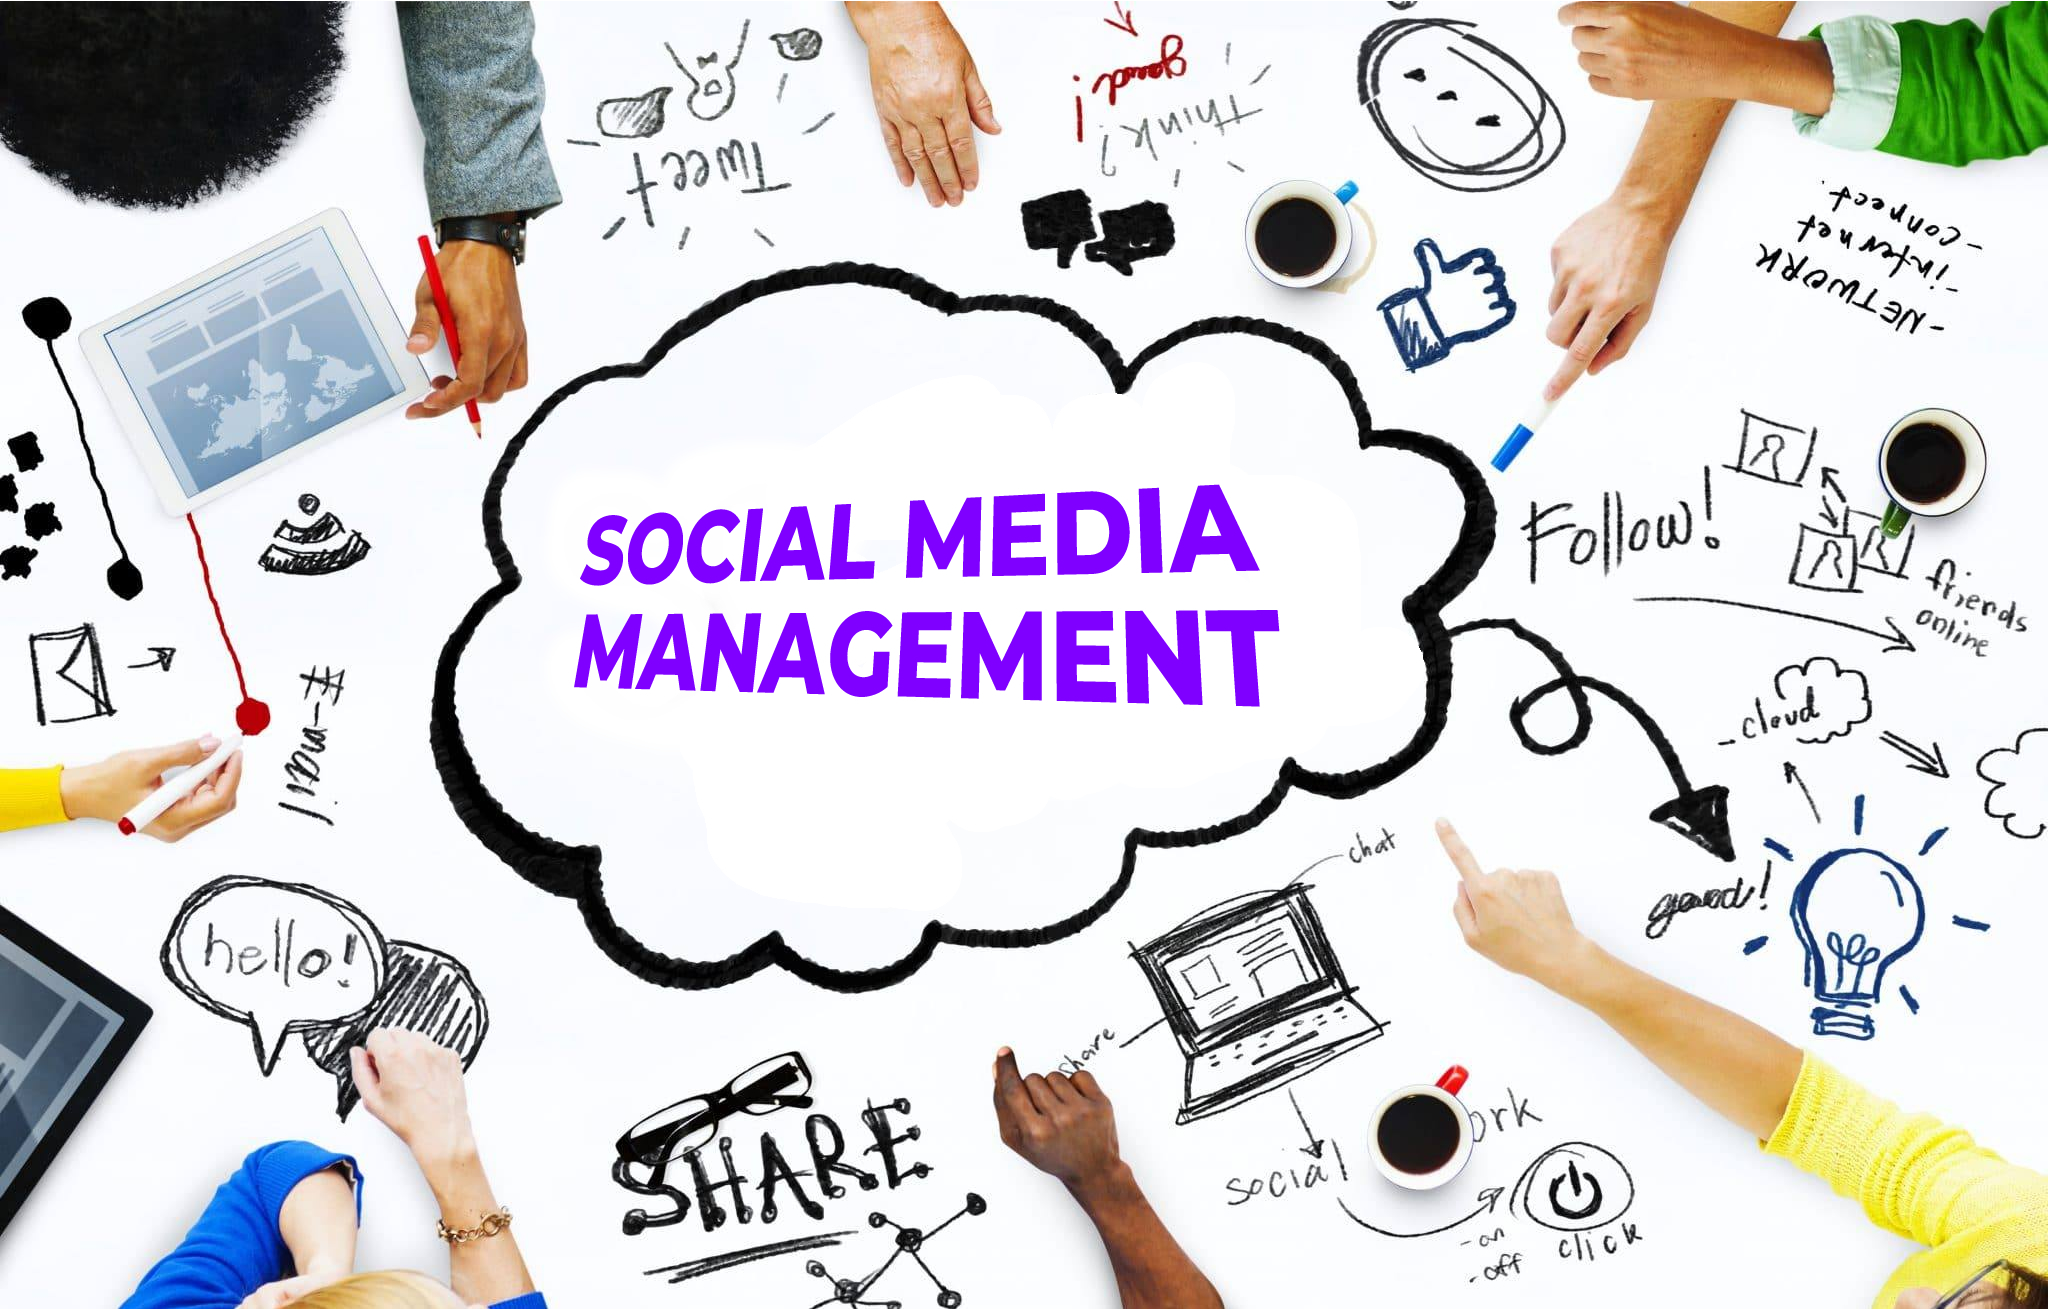 Social Media Management WITH FREE Facebook Training – WOW!